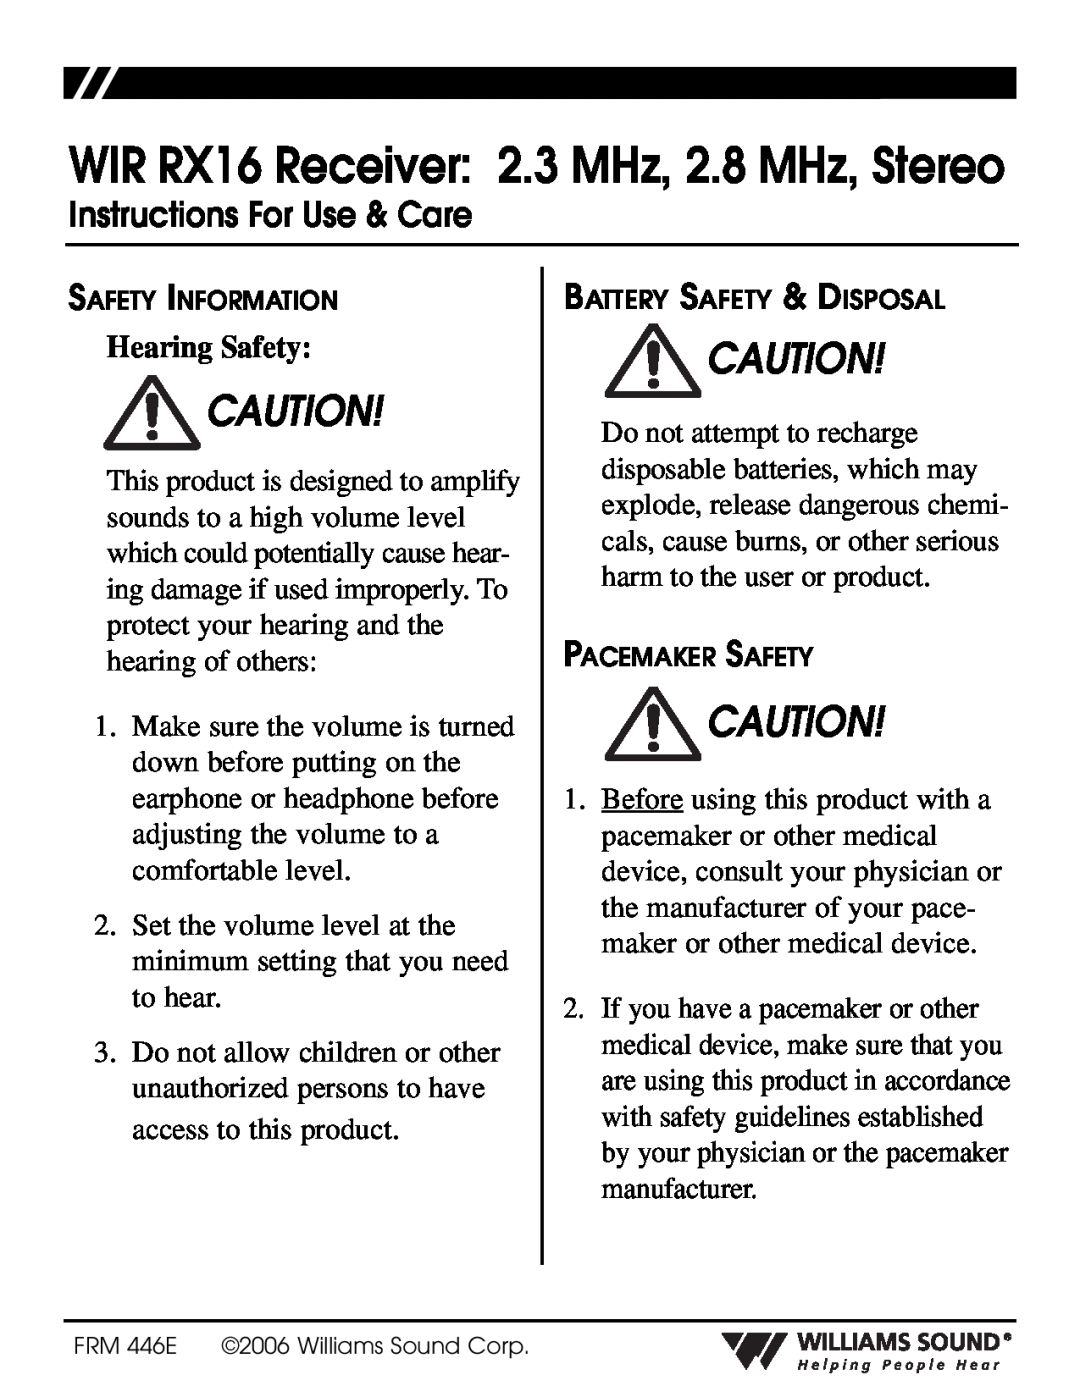 Williams Sound manual WIR RX16 Receiver 2.3 MHz, 2.8 MHz, Stereo, Instructions For Use & Care 